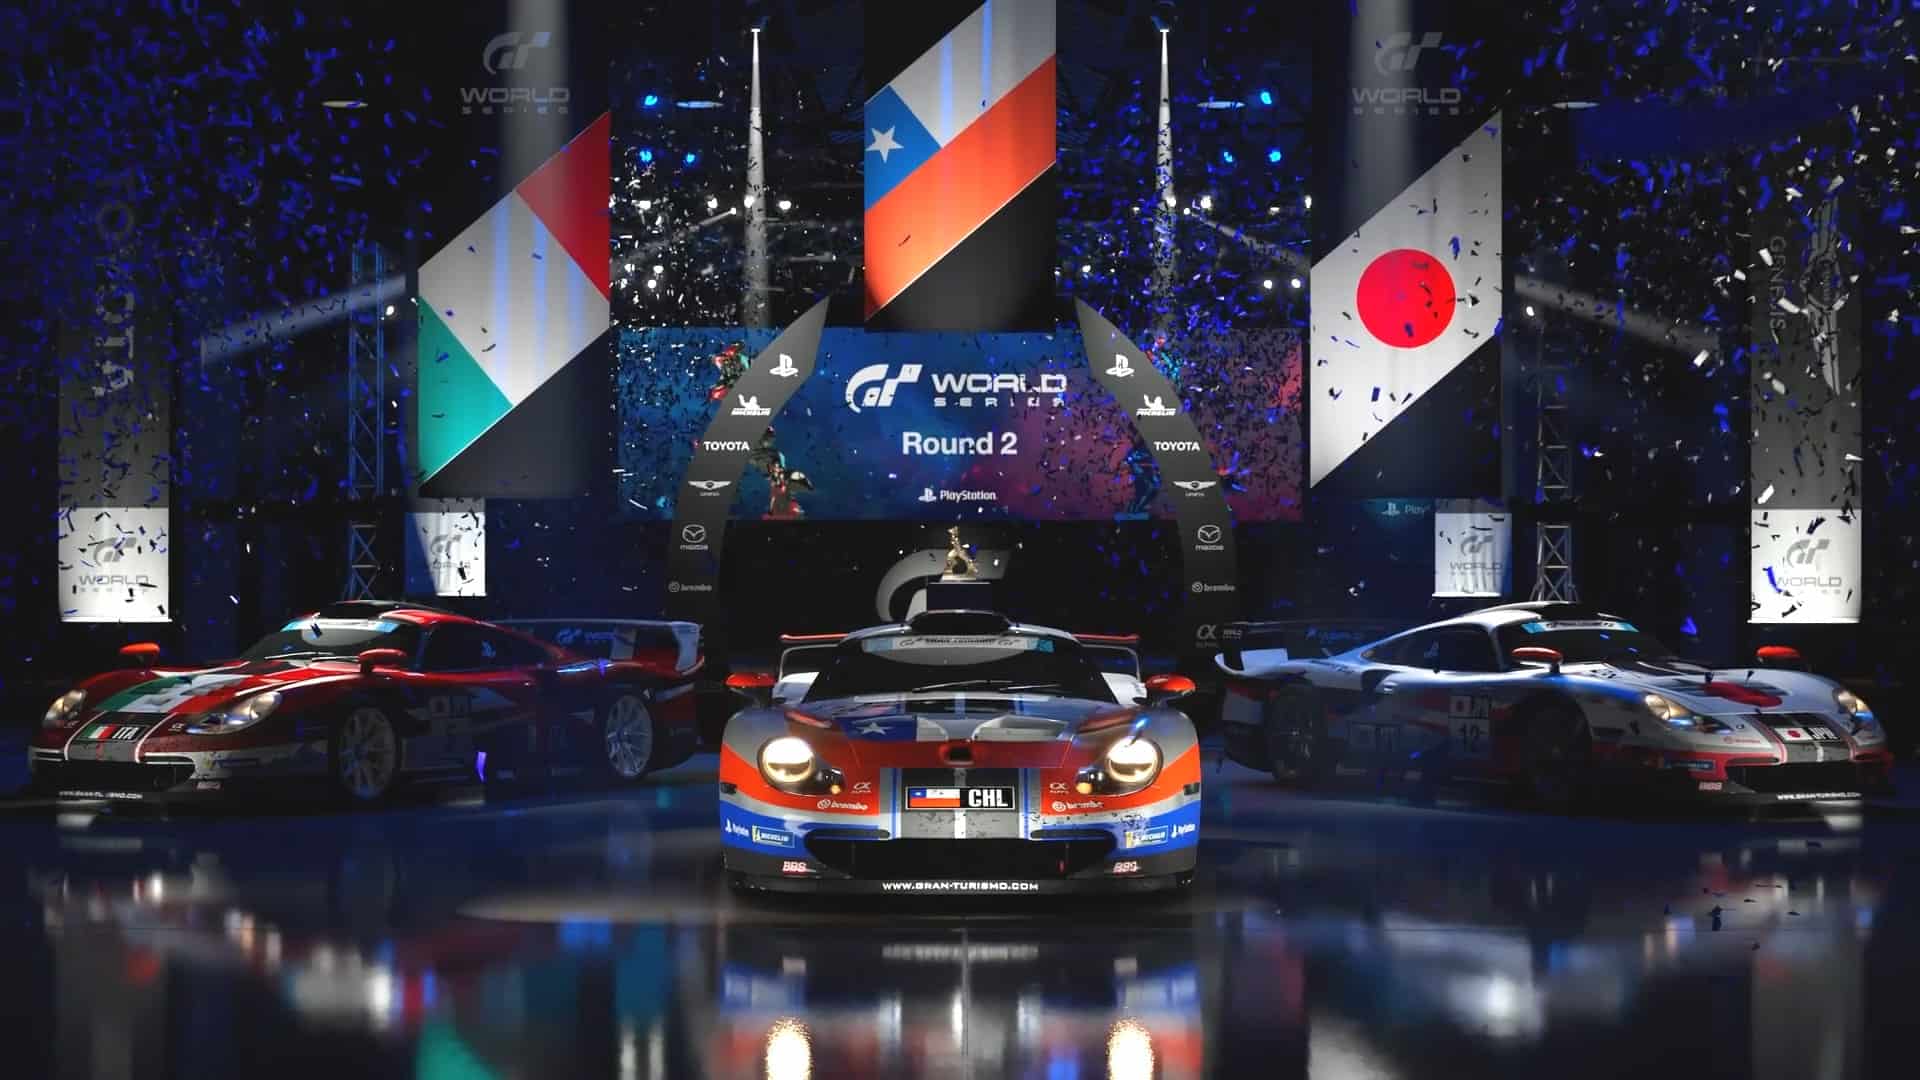 Inostroza and Chile dominate second Gran Turismo World Series Nations Cup round